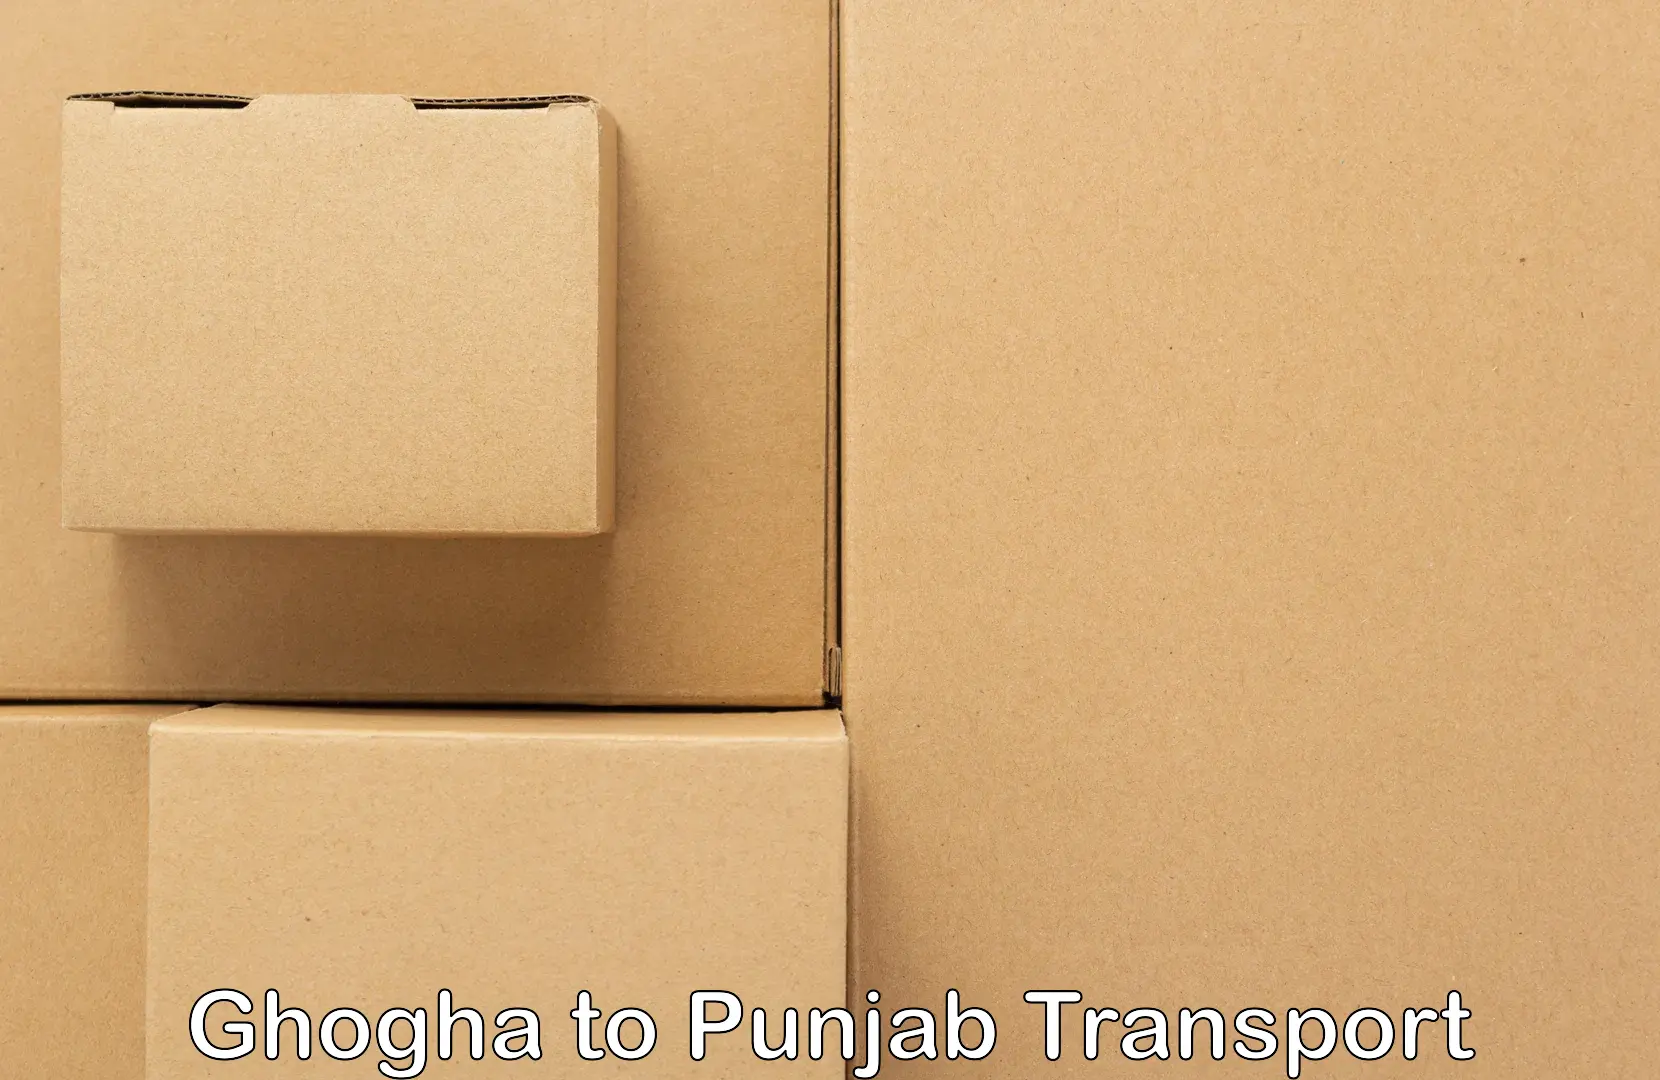 Parcel transport services Ghogha to Mohali